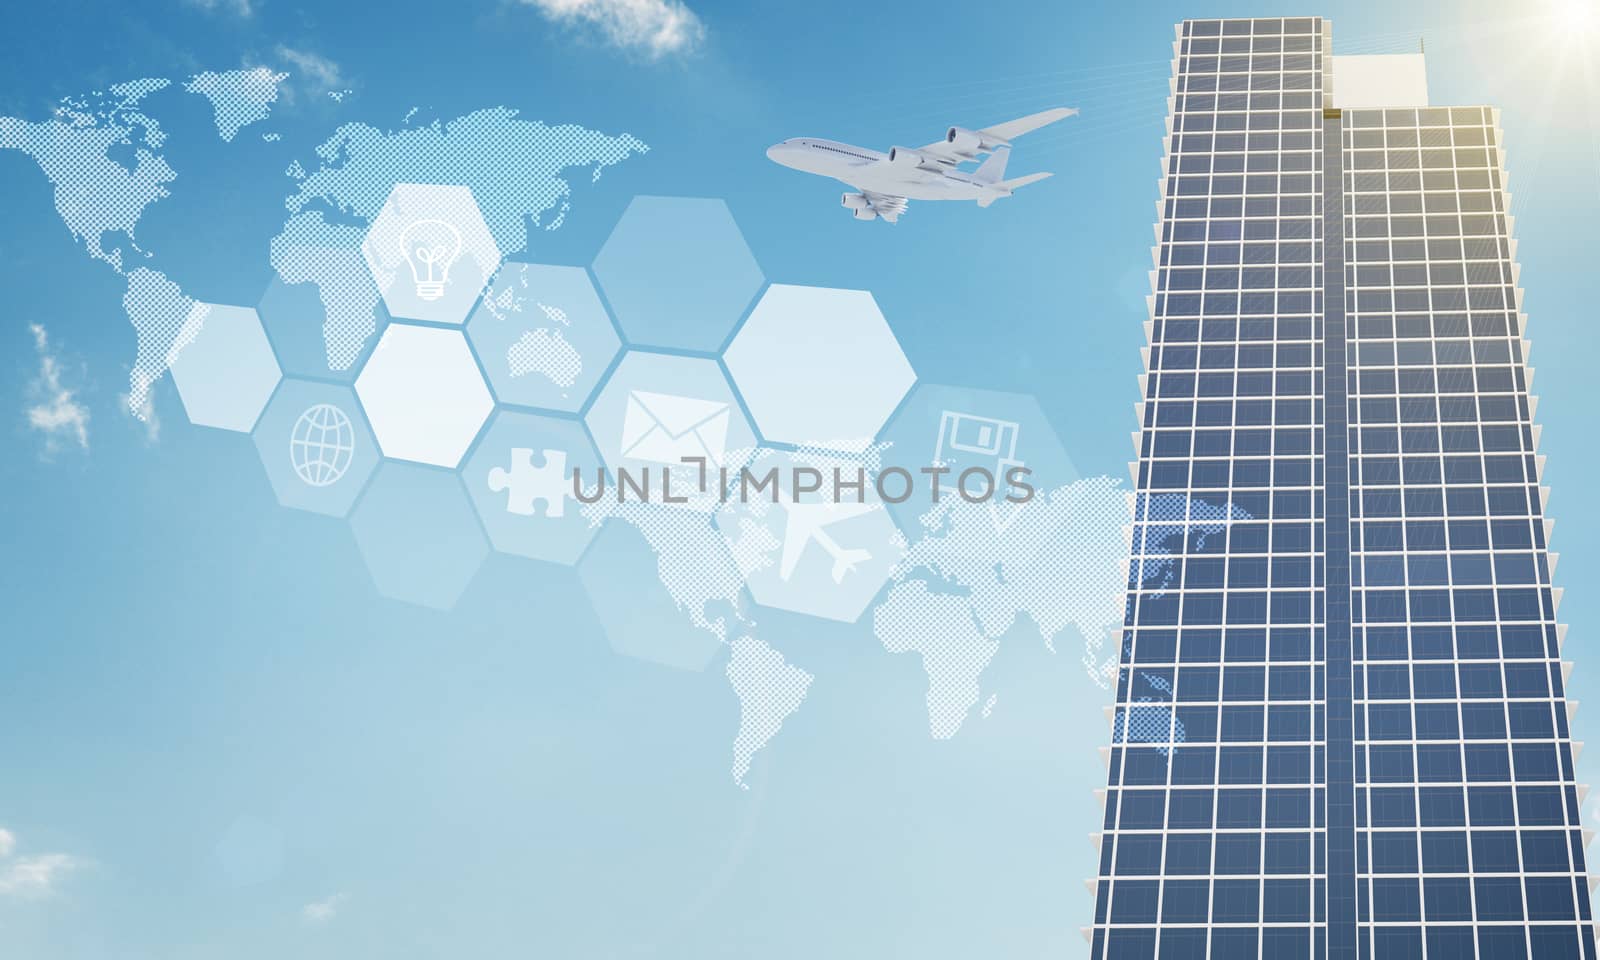 Jet with buildings, jet and symbols on blue sky background